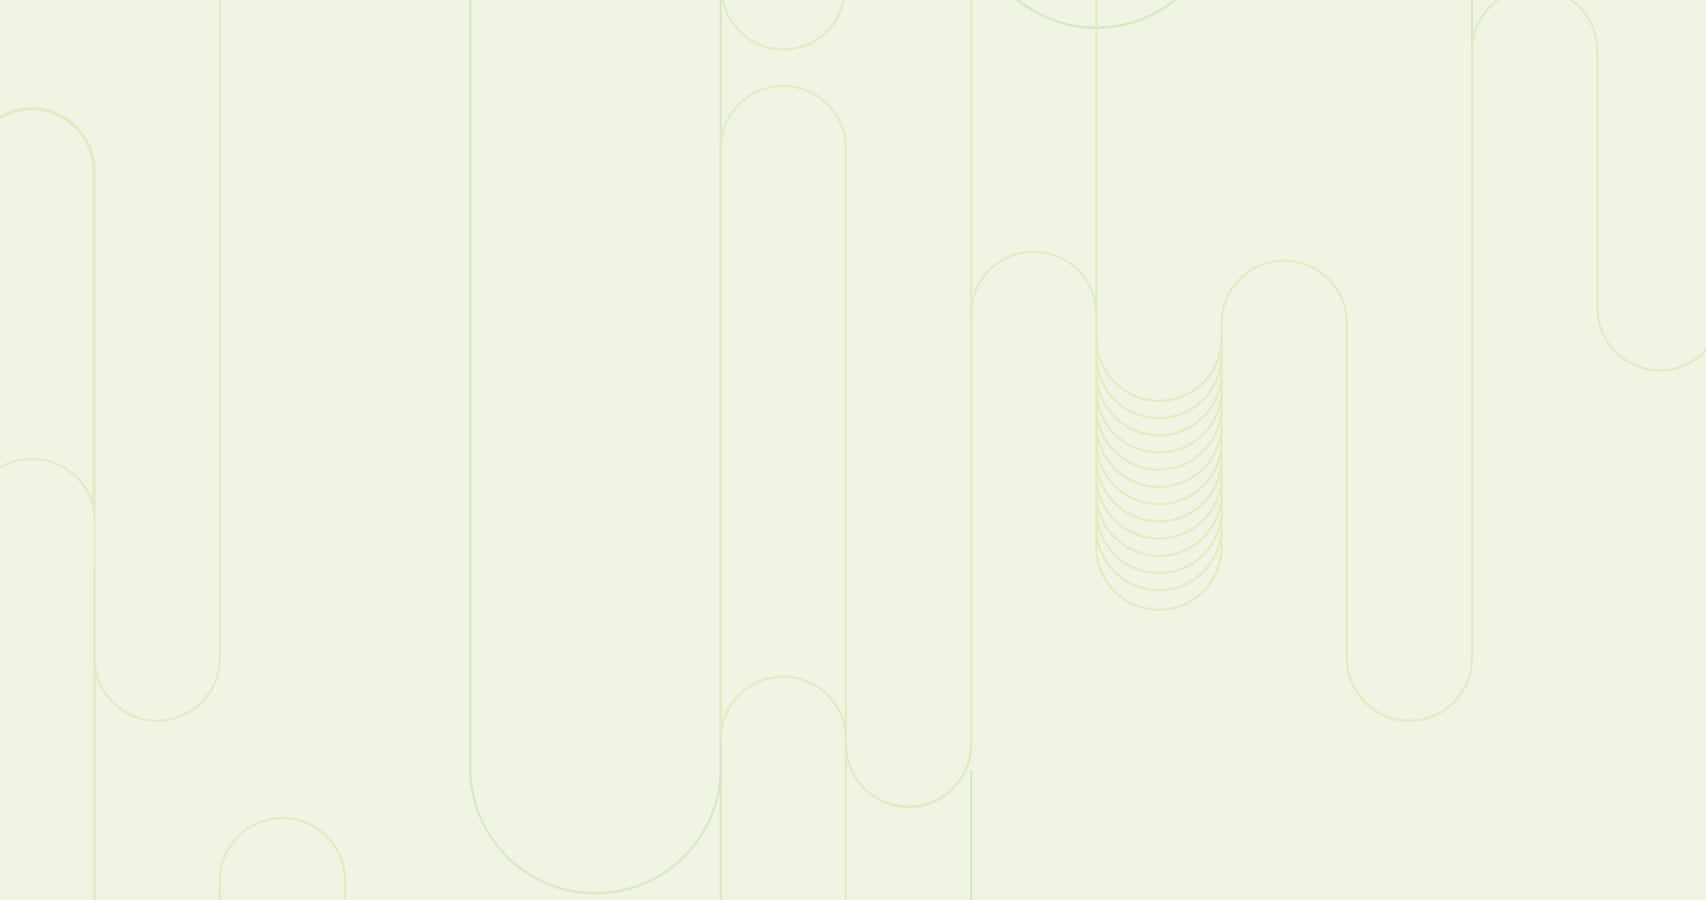 Light green background with darker green rounded lines